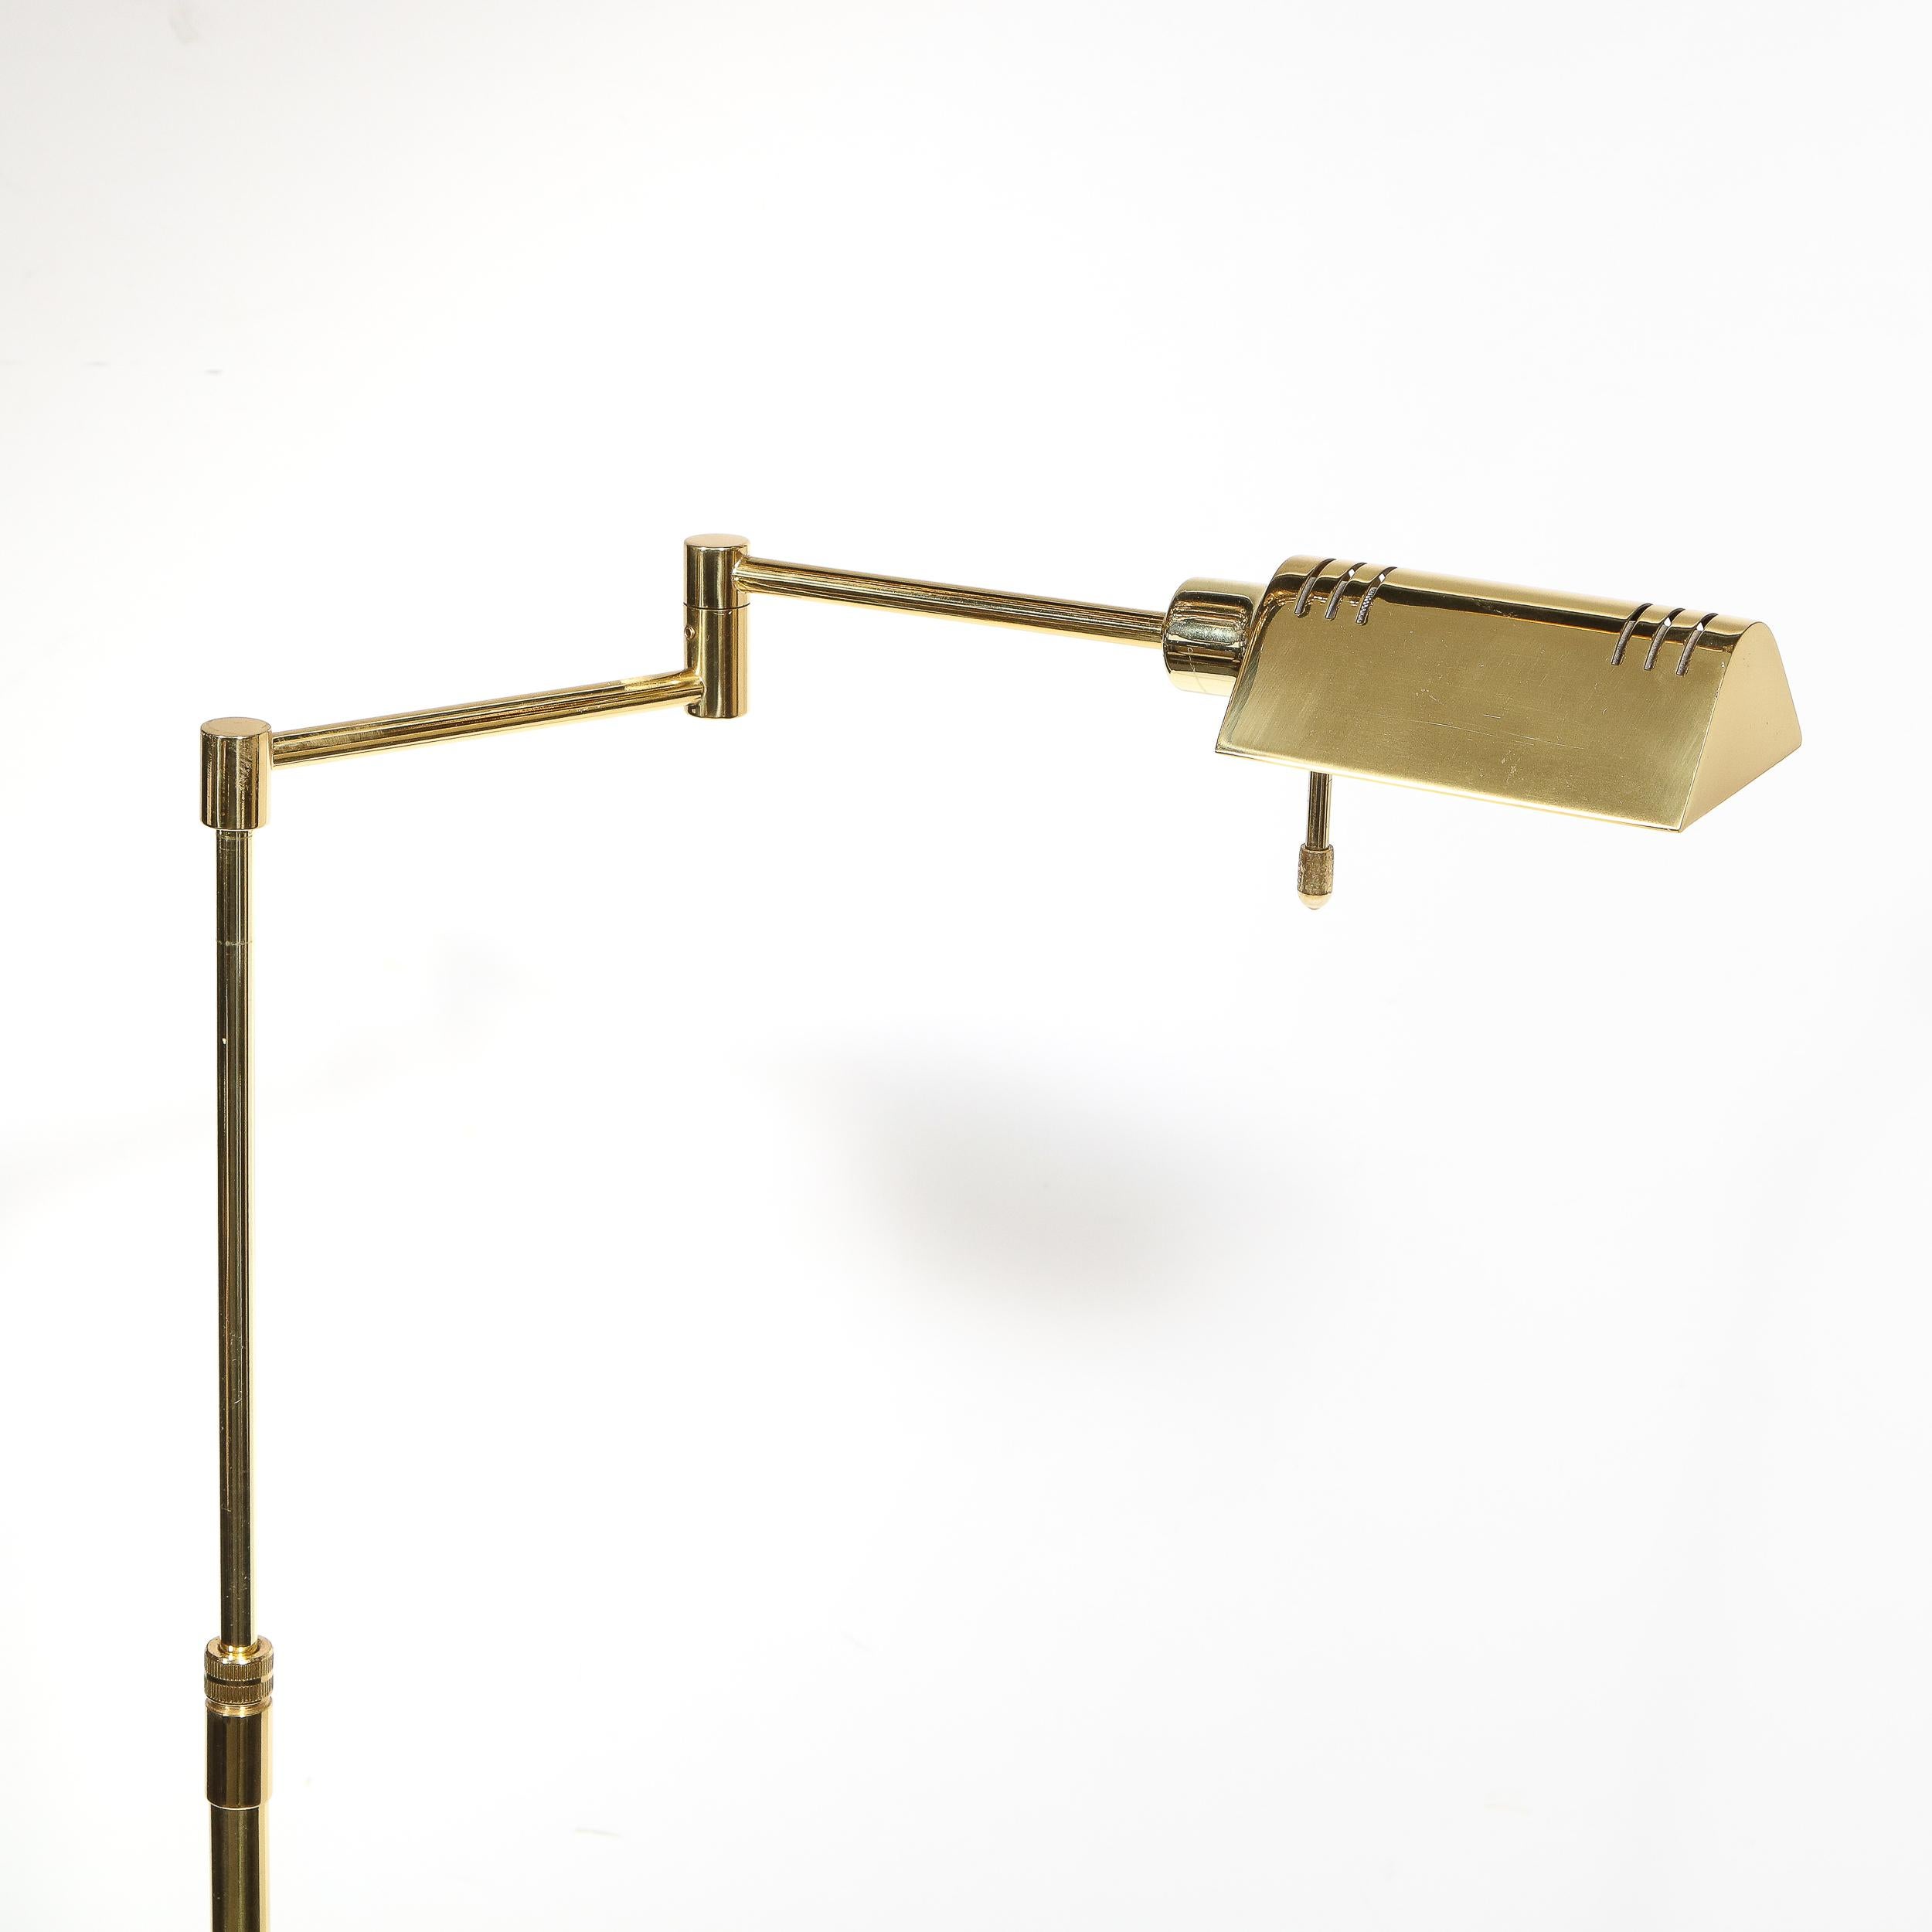 This elegant Mid-Century Modern articulating floor lamp was realized in the United States, circa 1970. It features a circular base from which a tubular body ascends upwards connecting to two adjoined articulating arms at a right angle. The